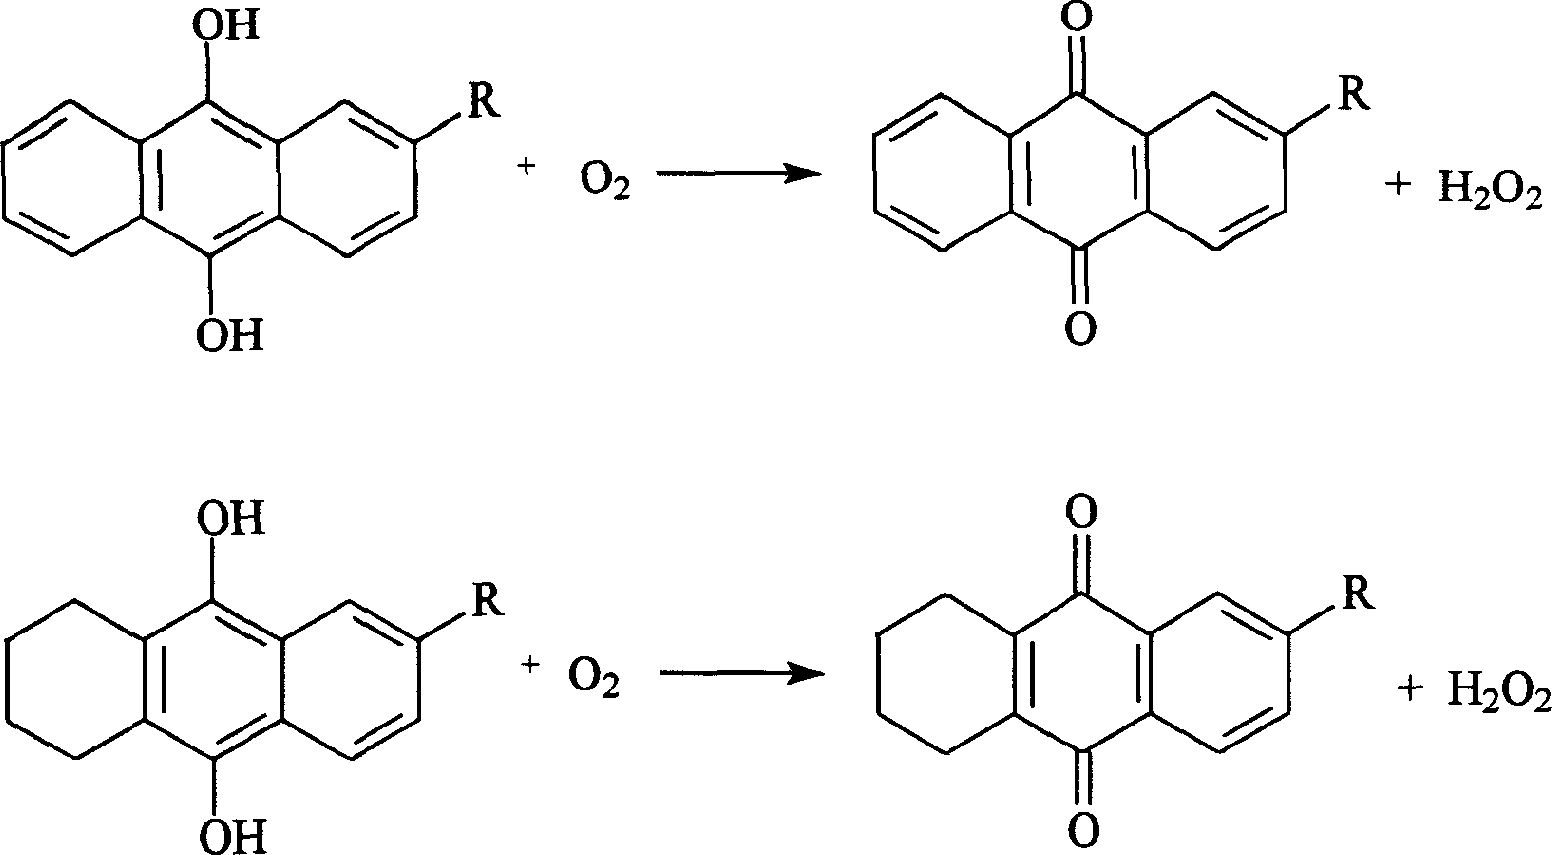 Hydrogenation process of hydrogen peroxide fluidized bed by anthraquinone